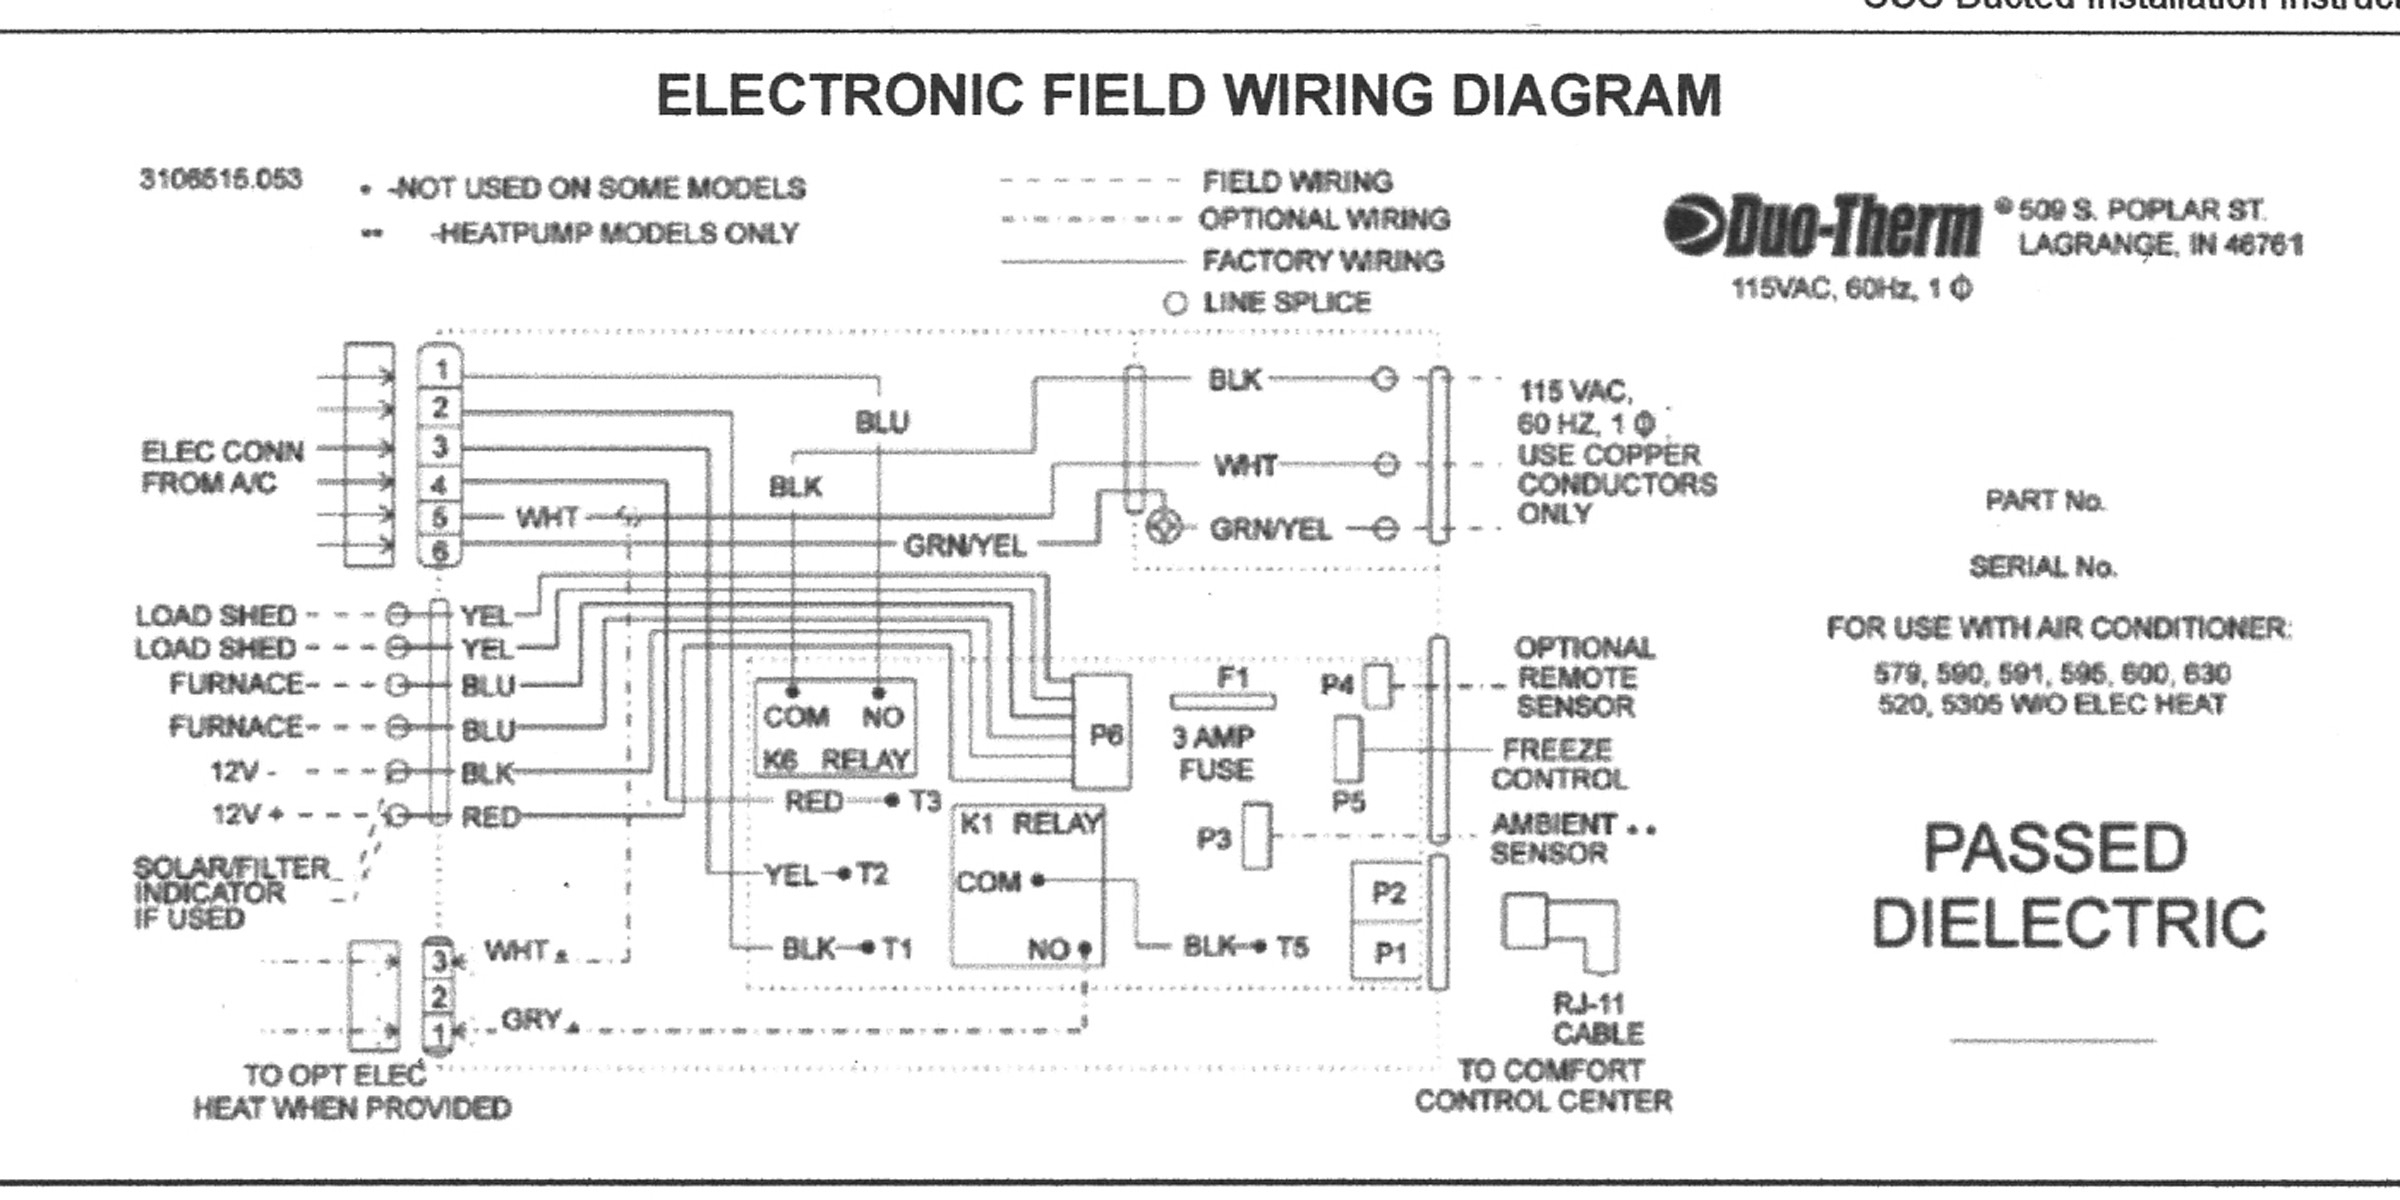 Ac Duo Therm Thermostat Wiring Diagram | Wiring Library - Duo Therm Thermostat Wiring Diagram